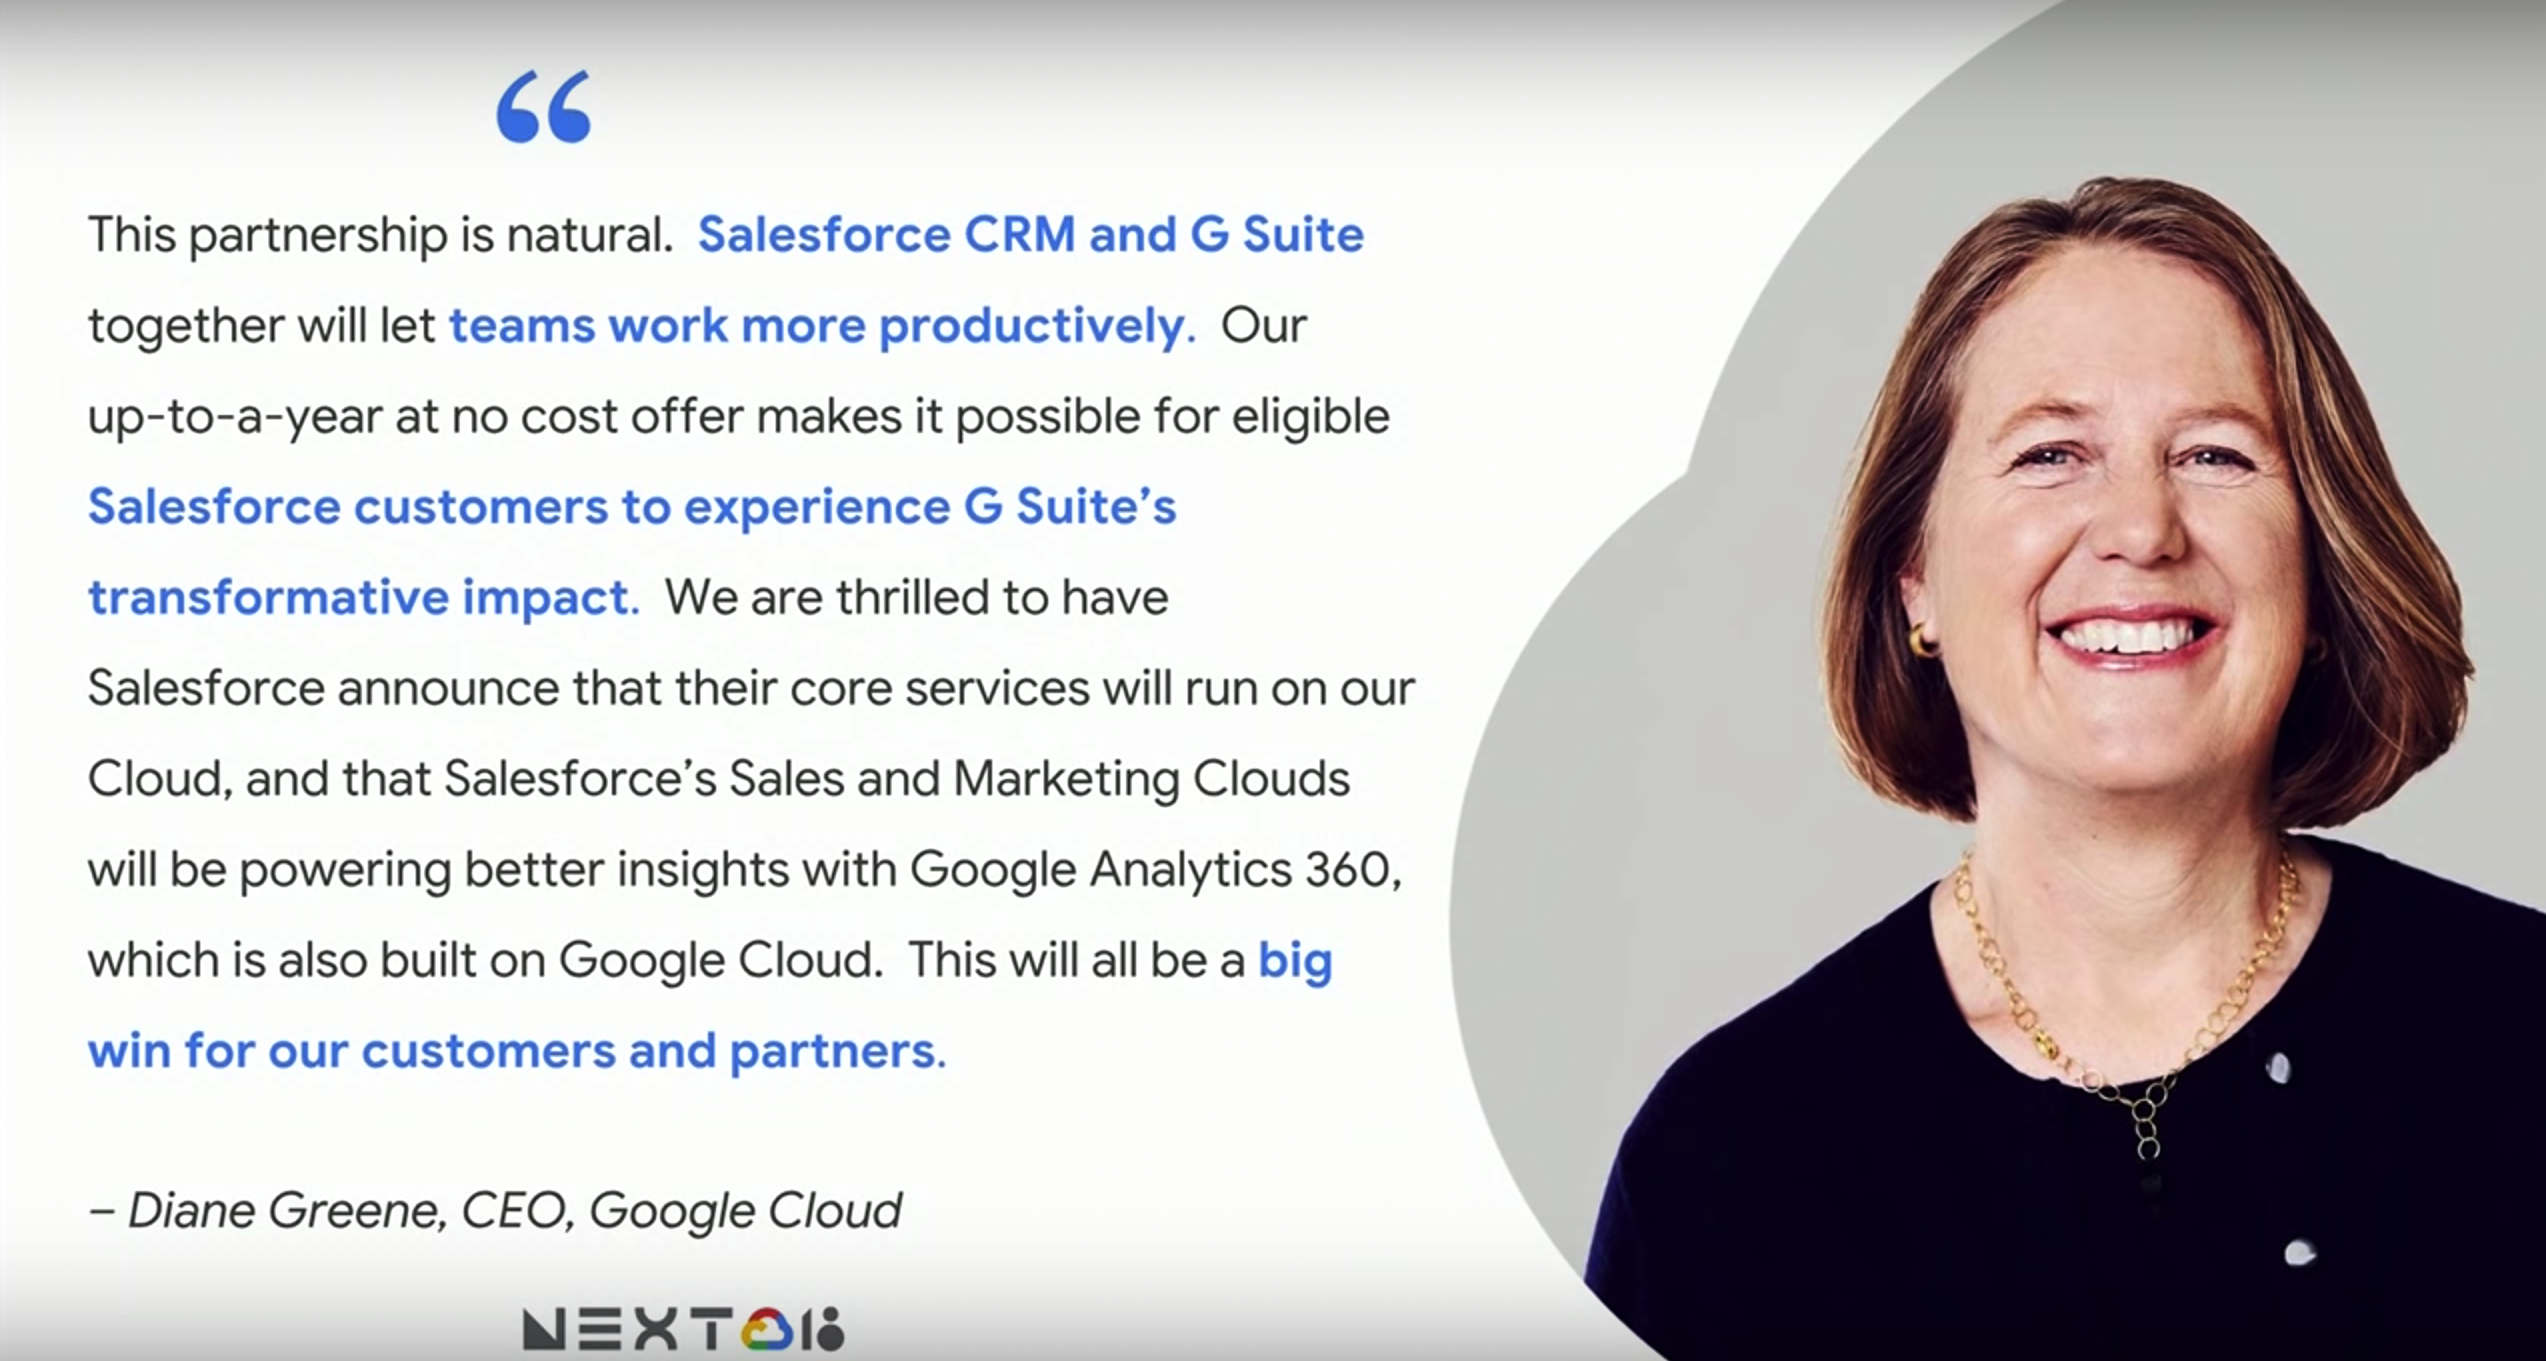 Free GSuite licenses to Salesforce customers